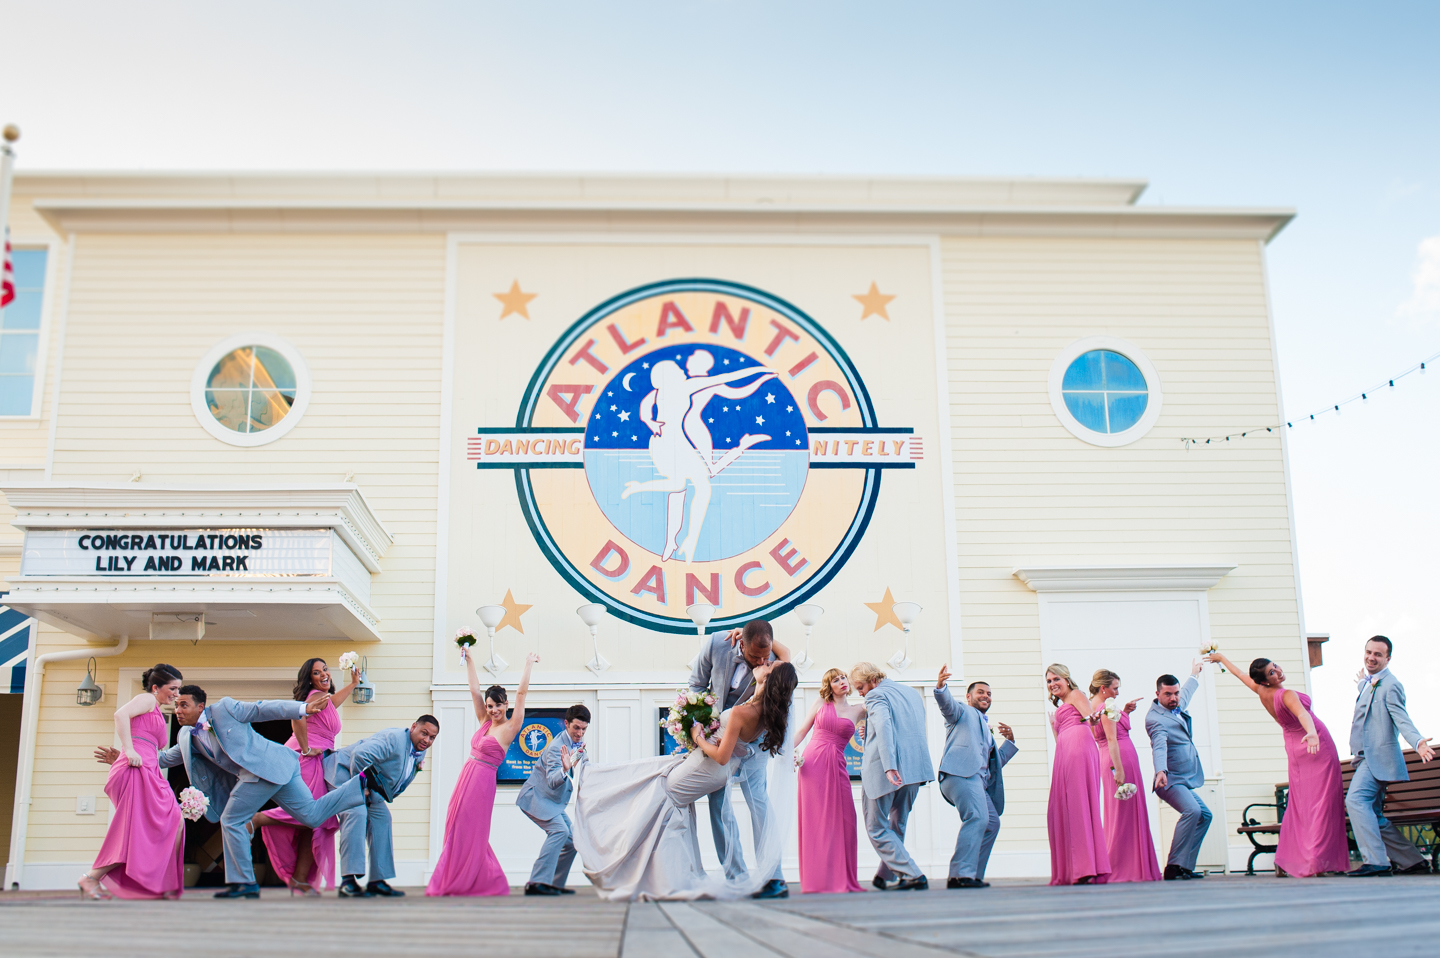 wedding party goofs off in front of atlantic dance hall 